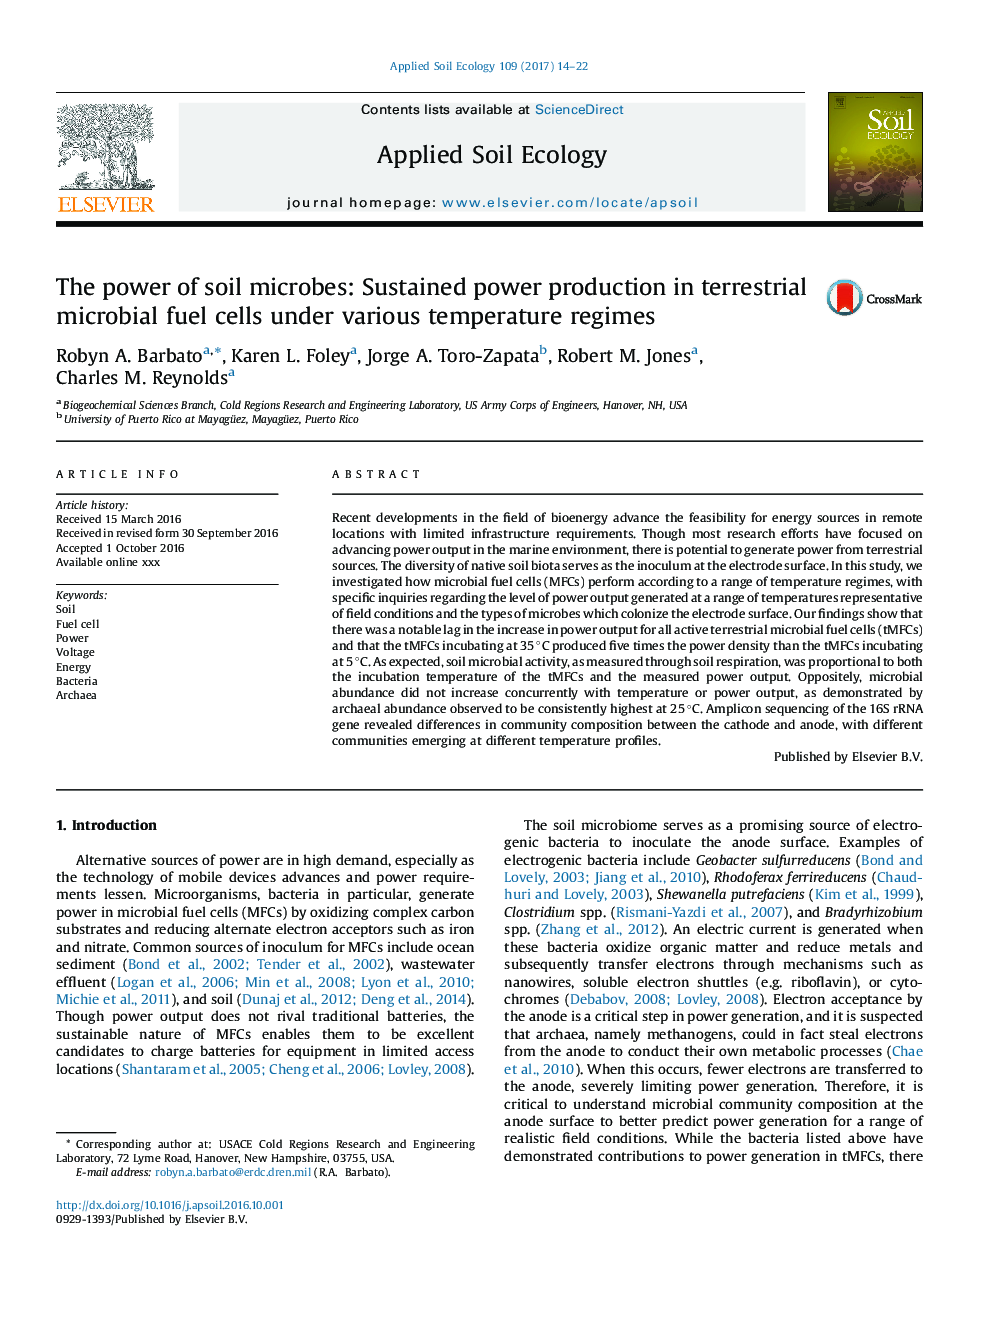 The power of soil microbes: Sustained power production in terrestrial microbial fuel cells under various temperature regimes